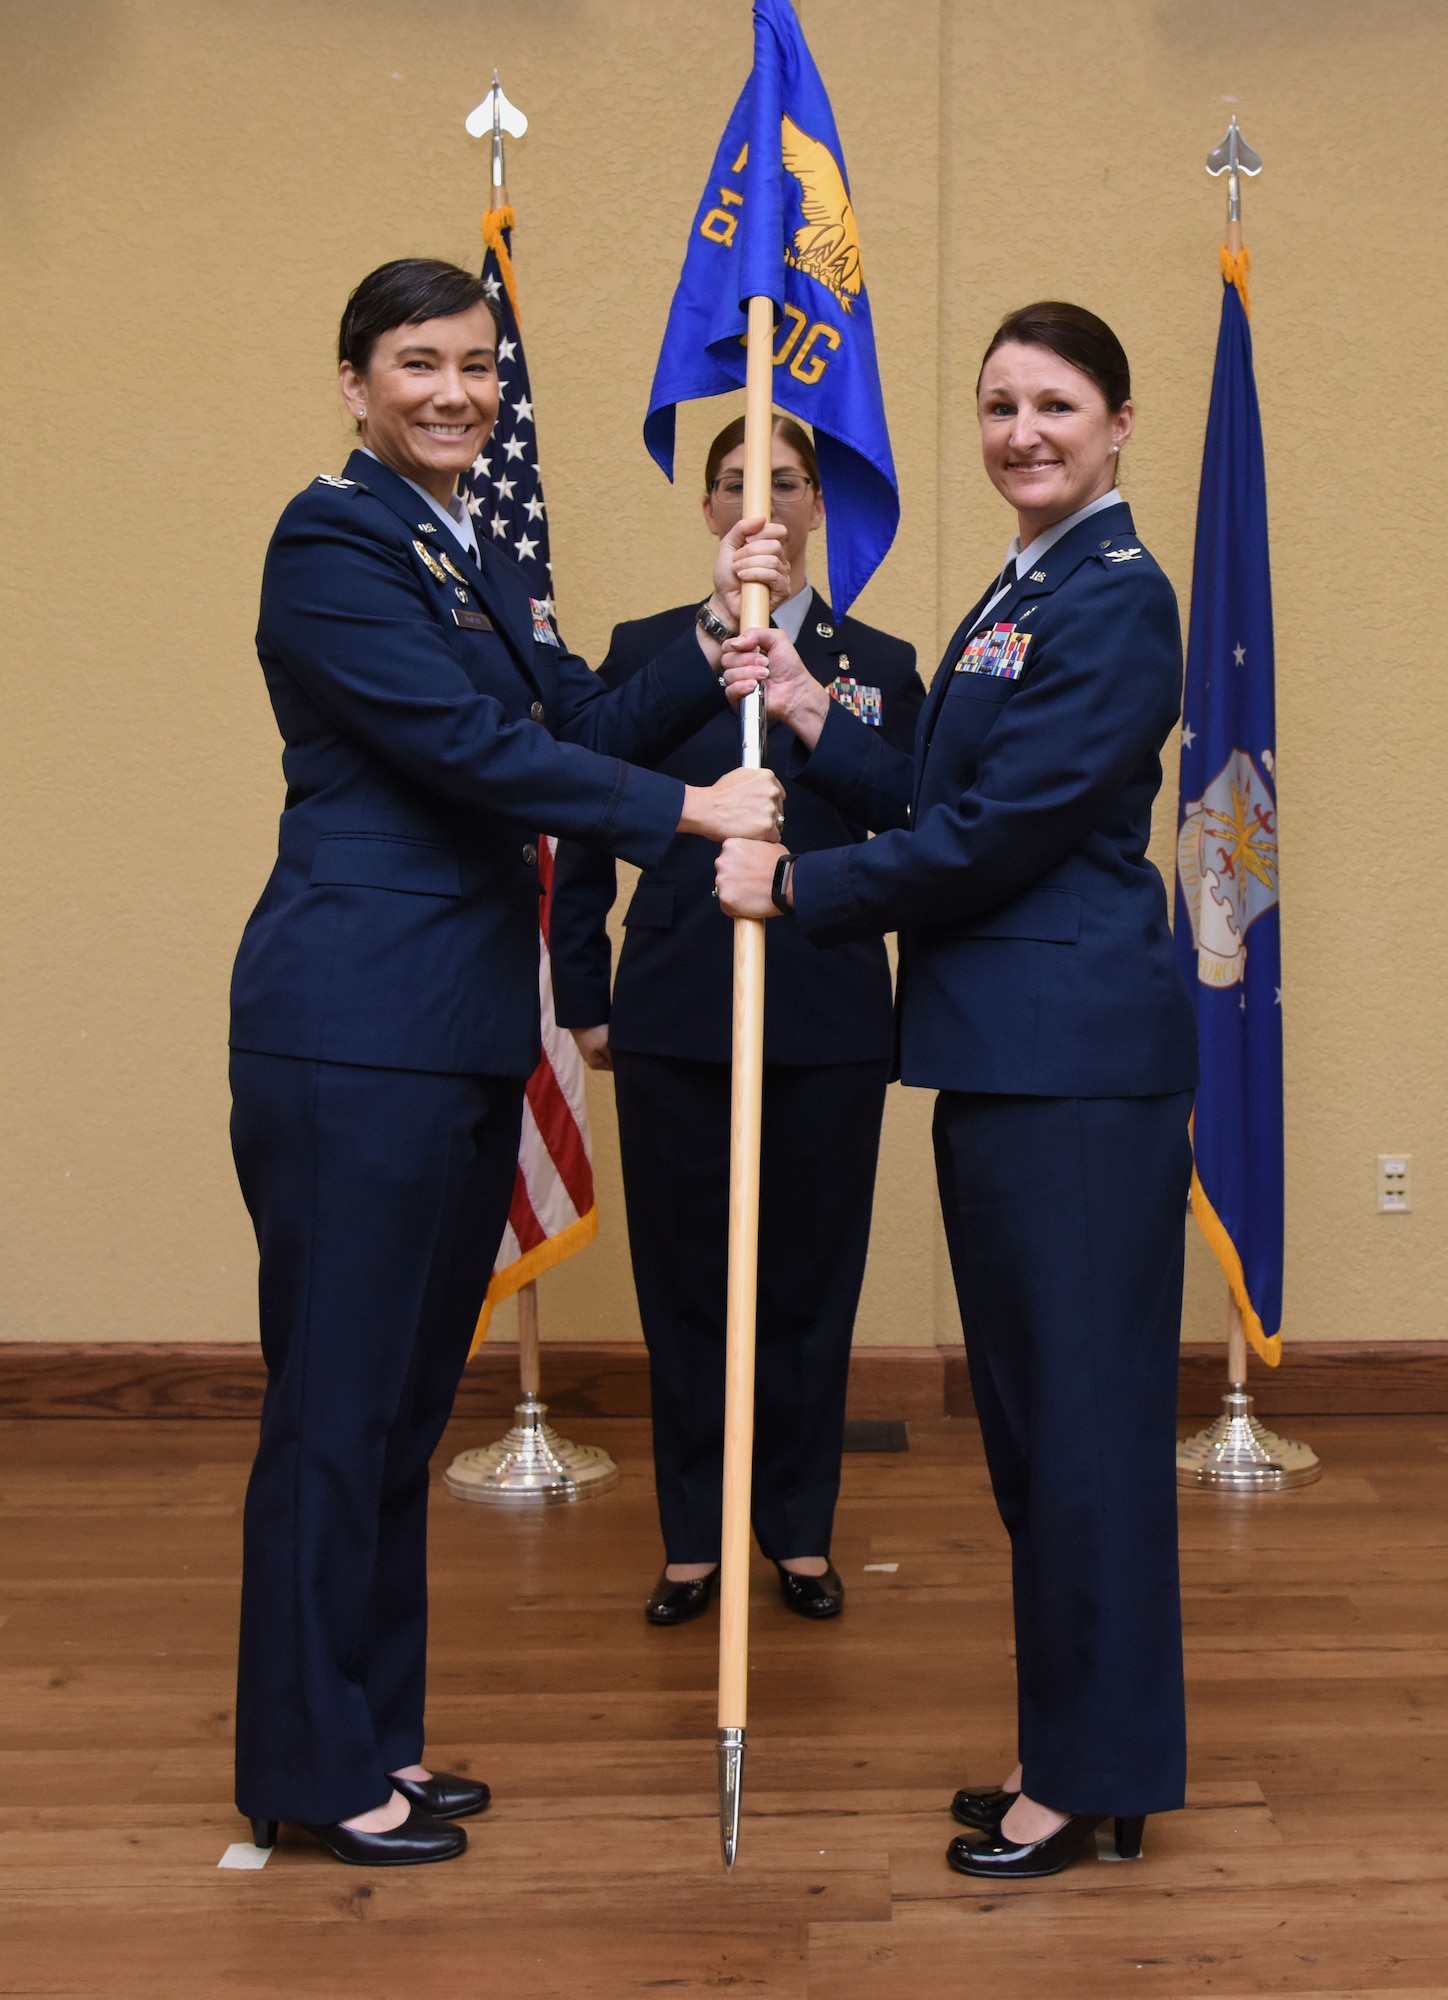 U.S. Air Force Col. Debra Lovette, 81st Training Wing commander, passes the 81st Medical Group guidon to Col. Beatrice Dolihite, incoming 81st MDG commander, during the 81st MDG change of command ceremony in the Bay Breeze Event Center at Keesler Air Force Base, Mississippi, June 22, 2018. The passing of the guidon is a ceremonial symbol of exchanging command from one commander to another. (U.S. Air Force photo by Kemberly Groue)